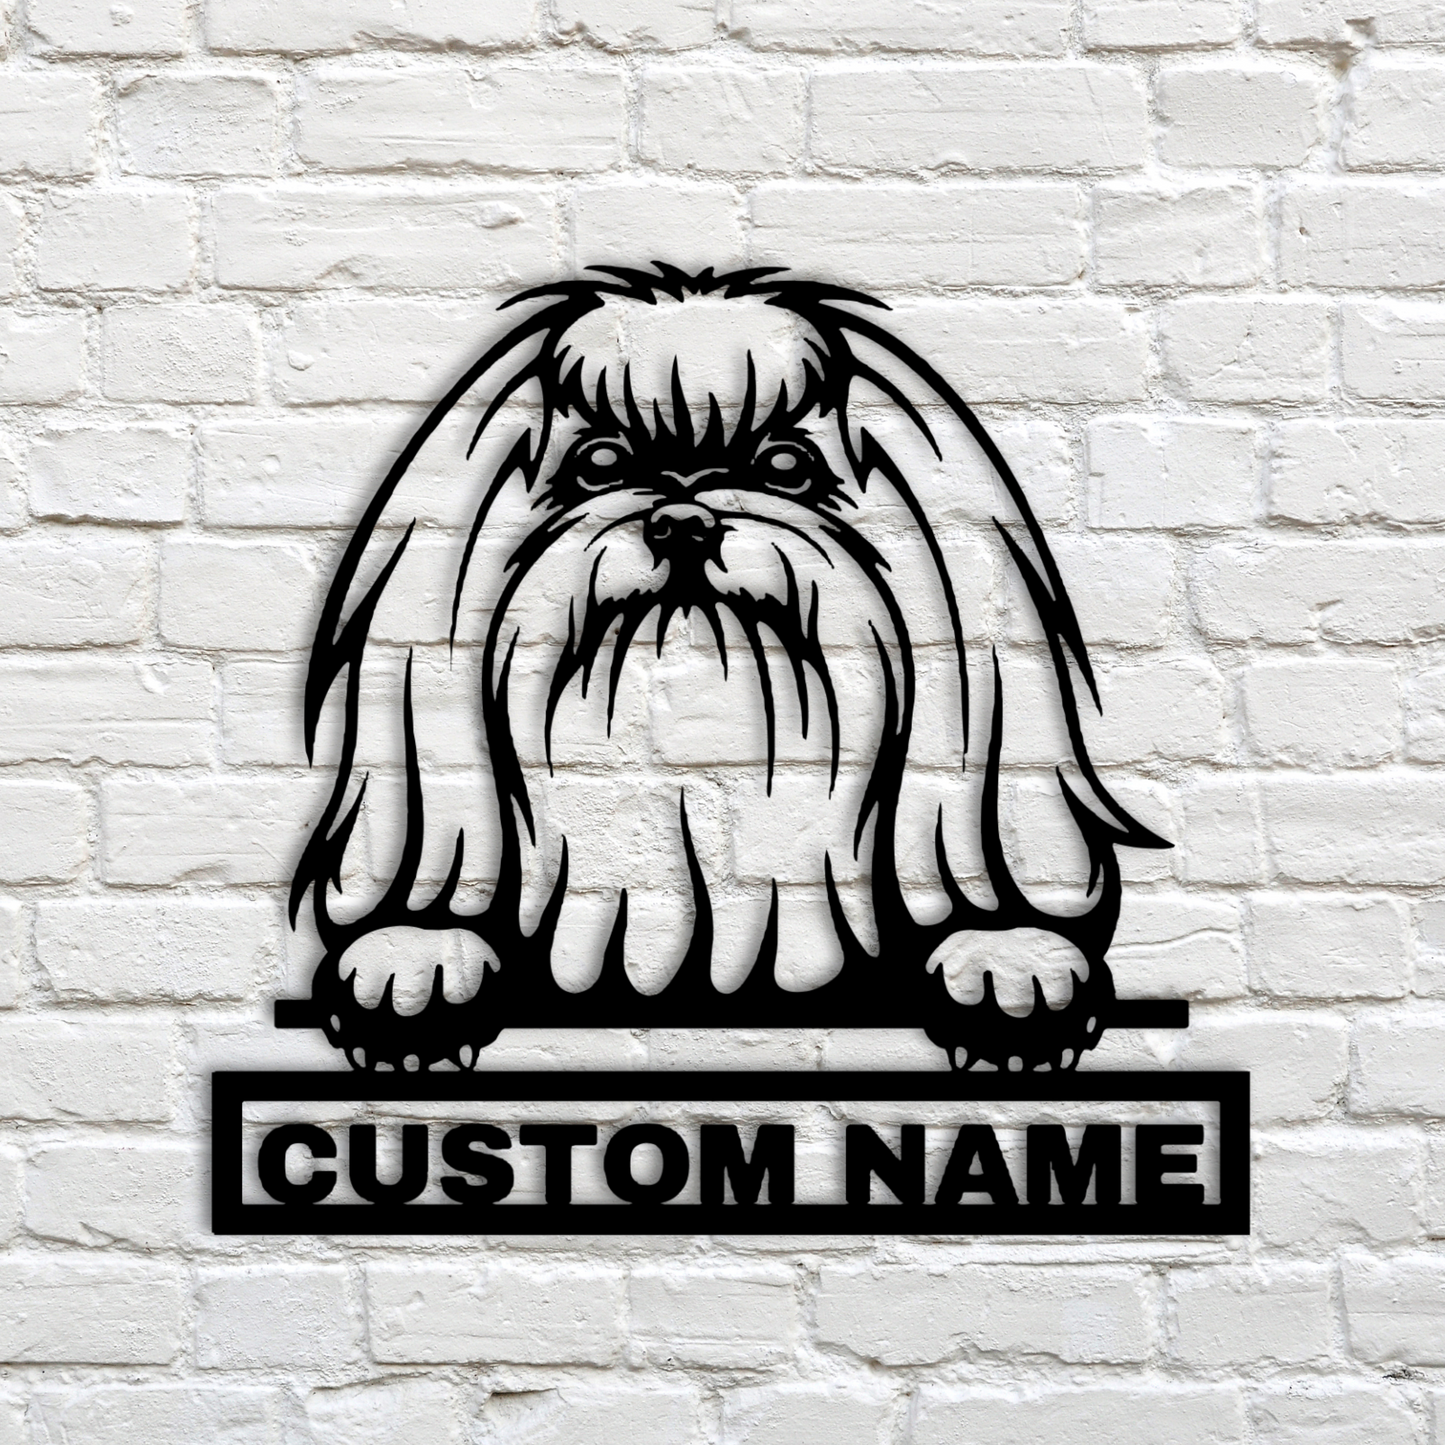 Personalized Maltese Dog Metal Sign - Maltese Custom Name Wall Decor, Metal Signs Customized Outdoor Indoor, Wall Art Gift For Maltese Dog Lover